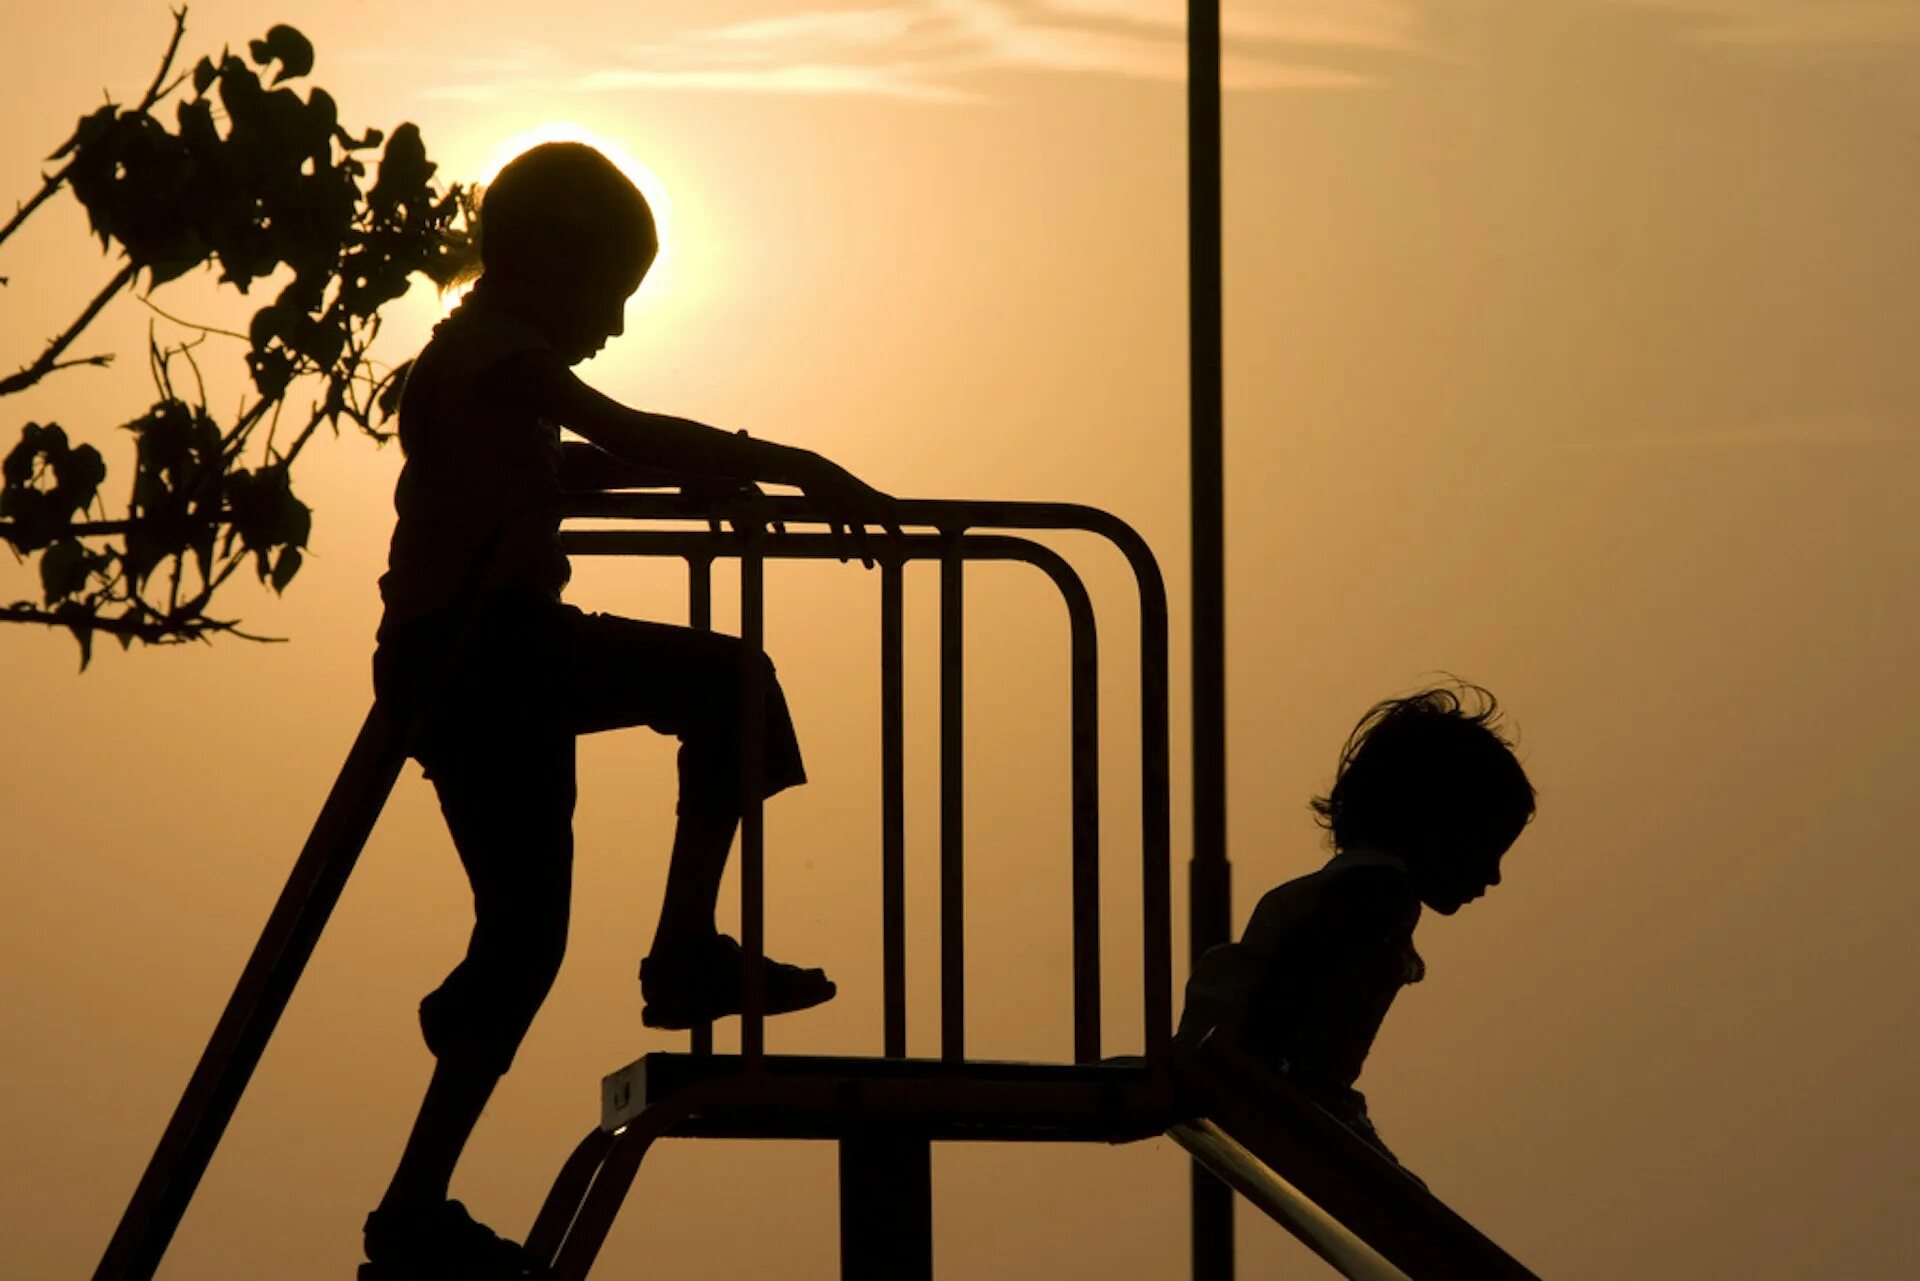 Ребенок уходит силуэт. Convention of the rights of the child.. Children's rights at Home. Child playing in the Sun.